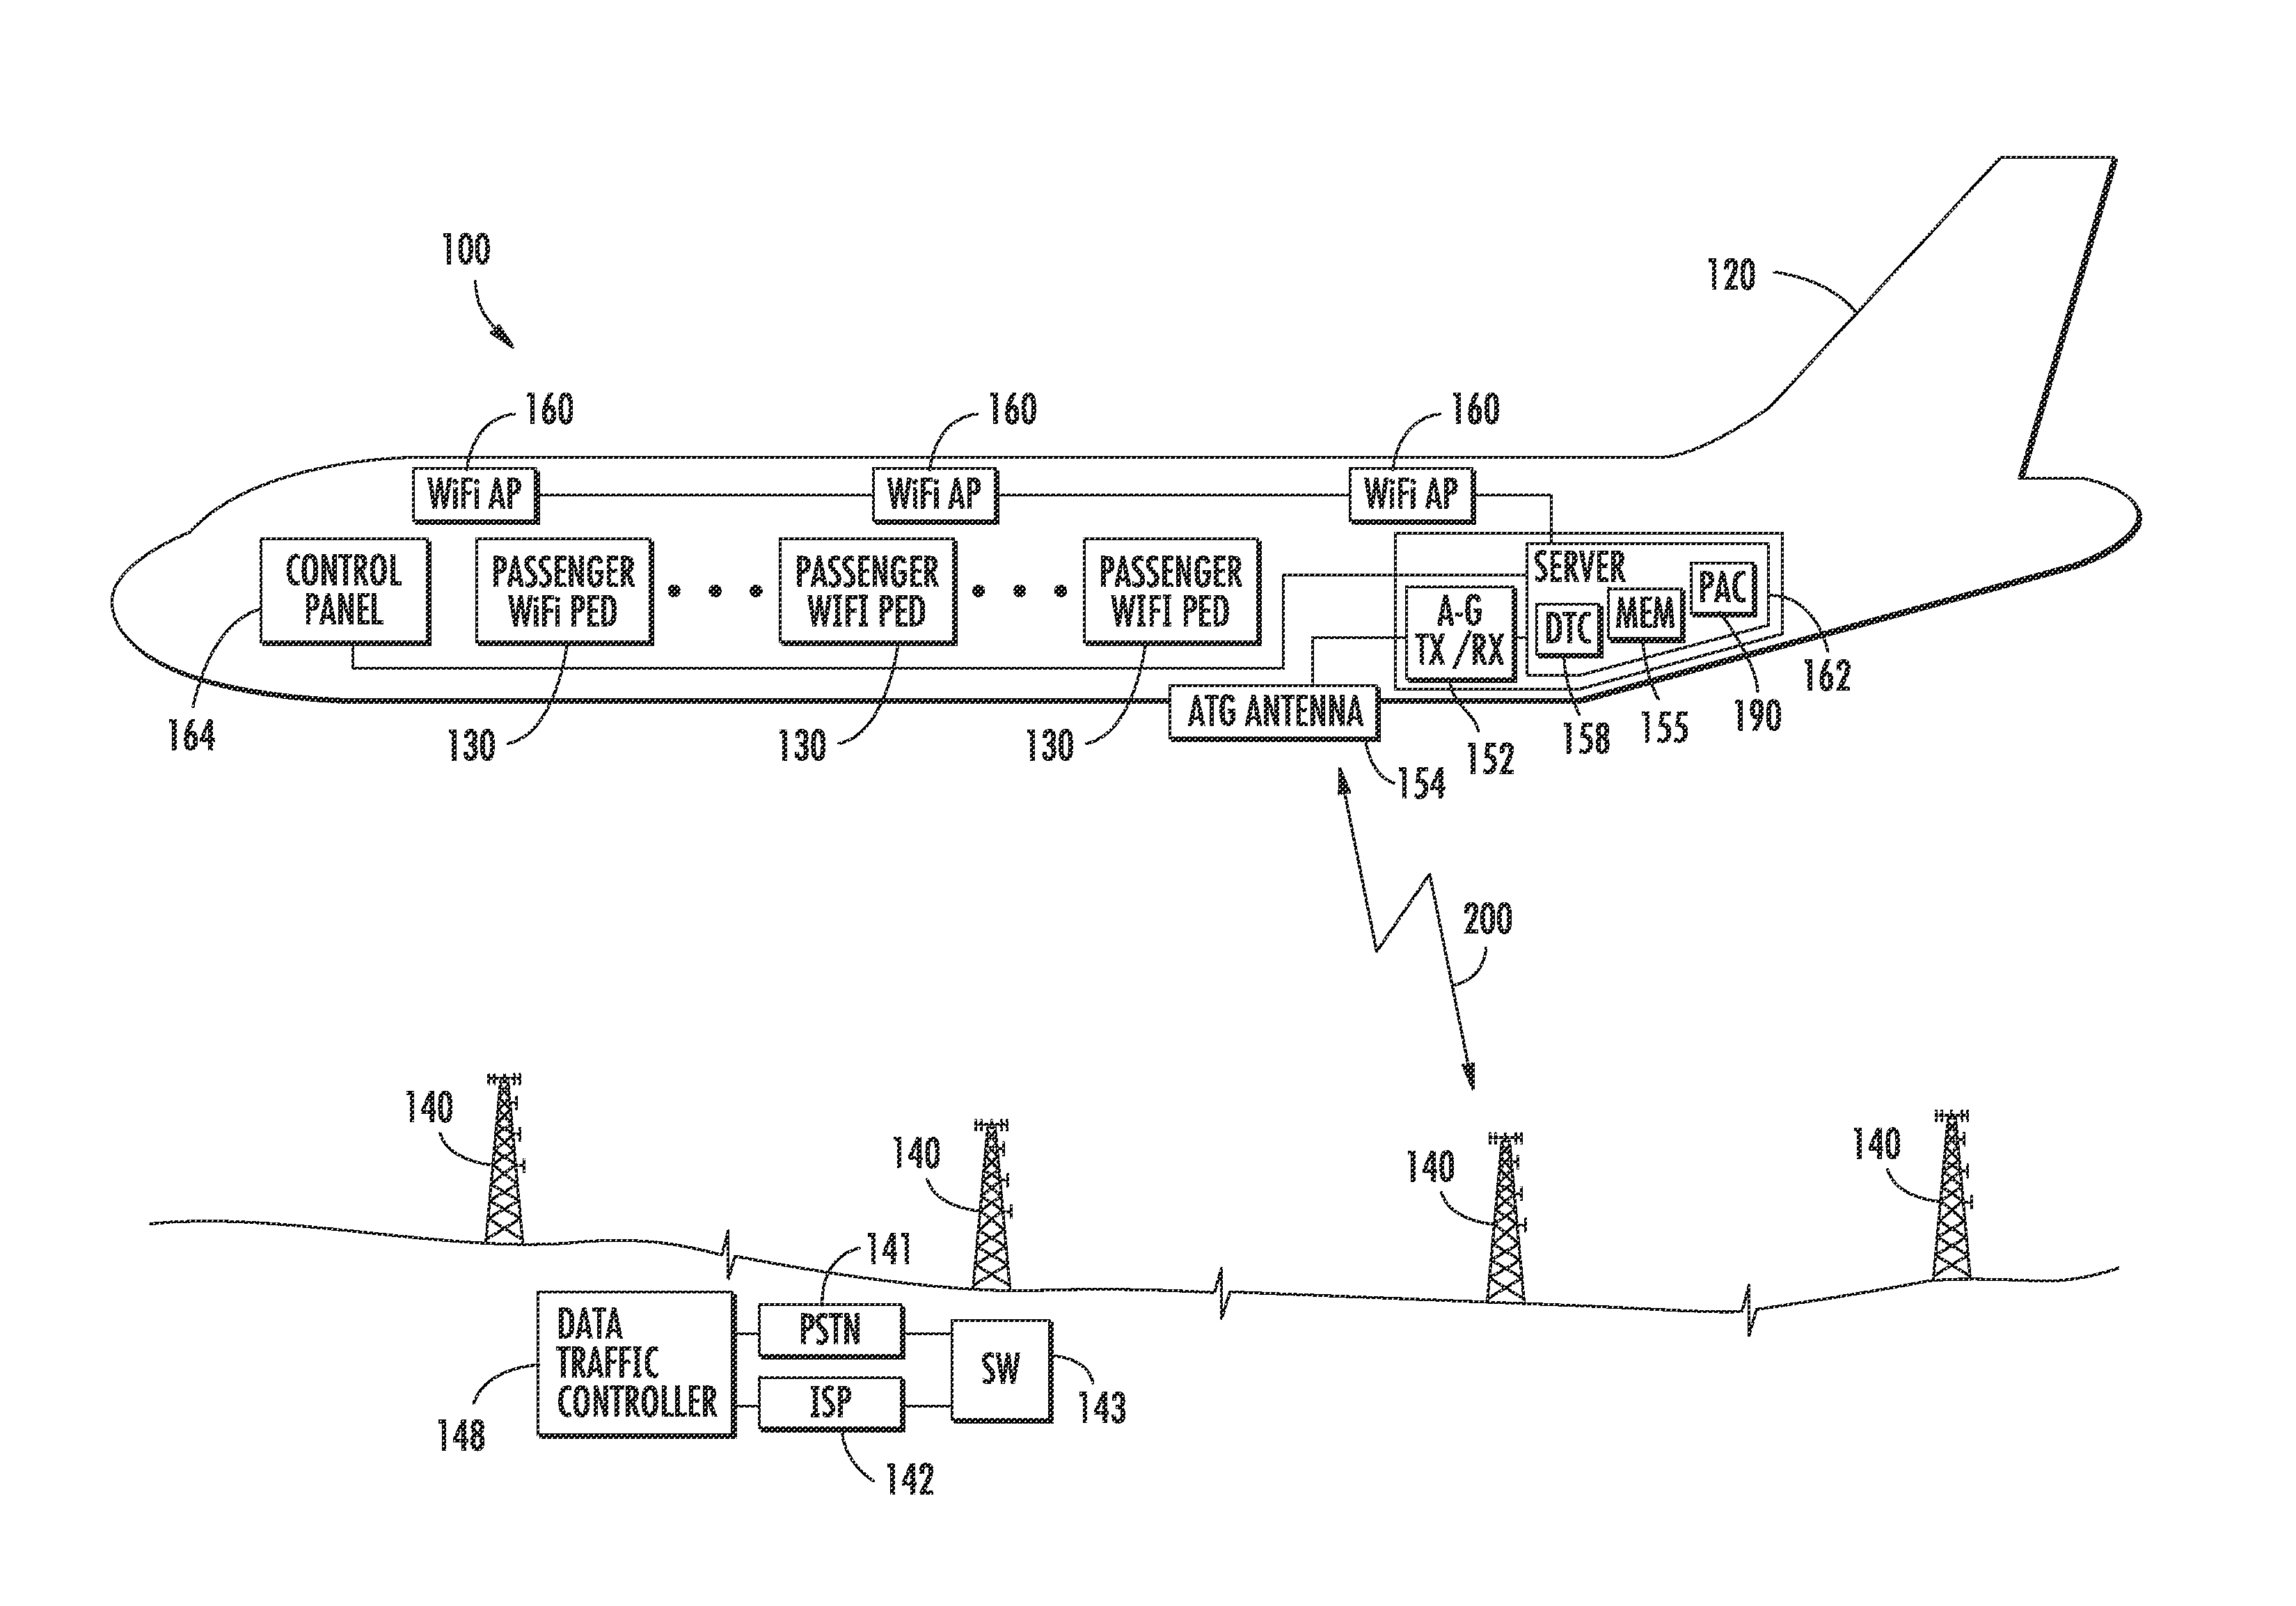 Registration of a personal electronic device (PED) with an aircraft ife system using a ped generated registration identifier and associated methods